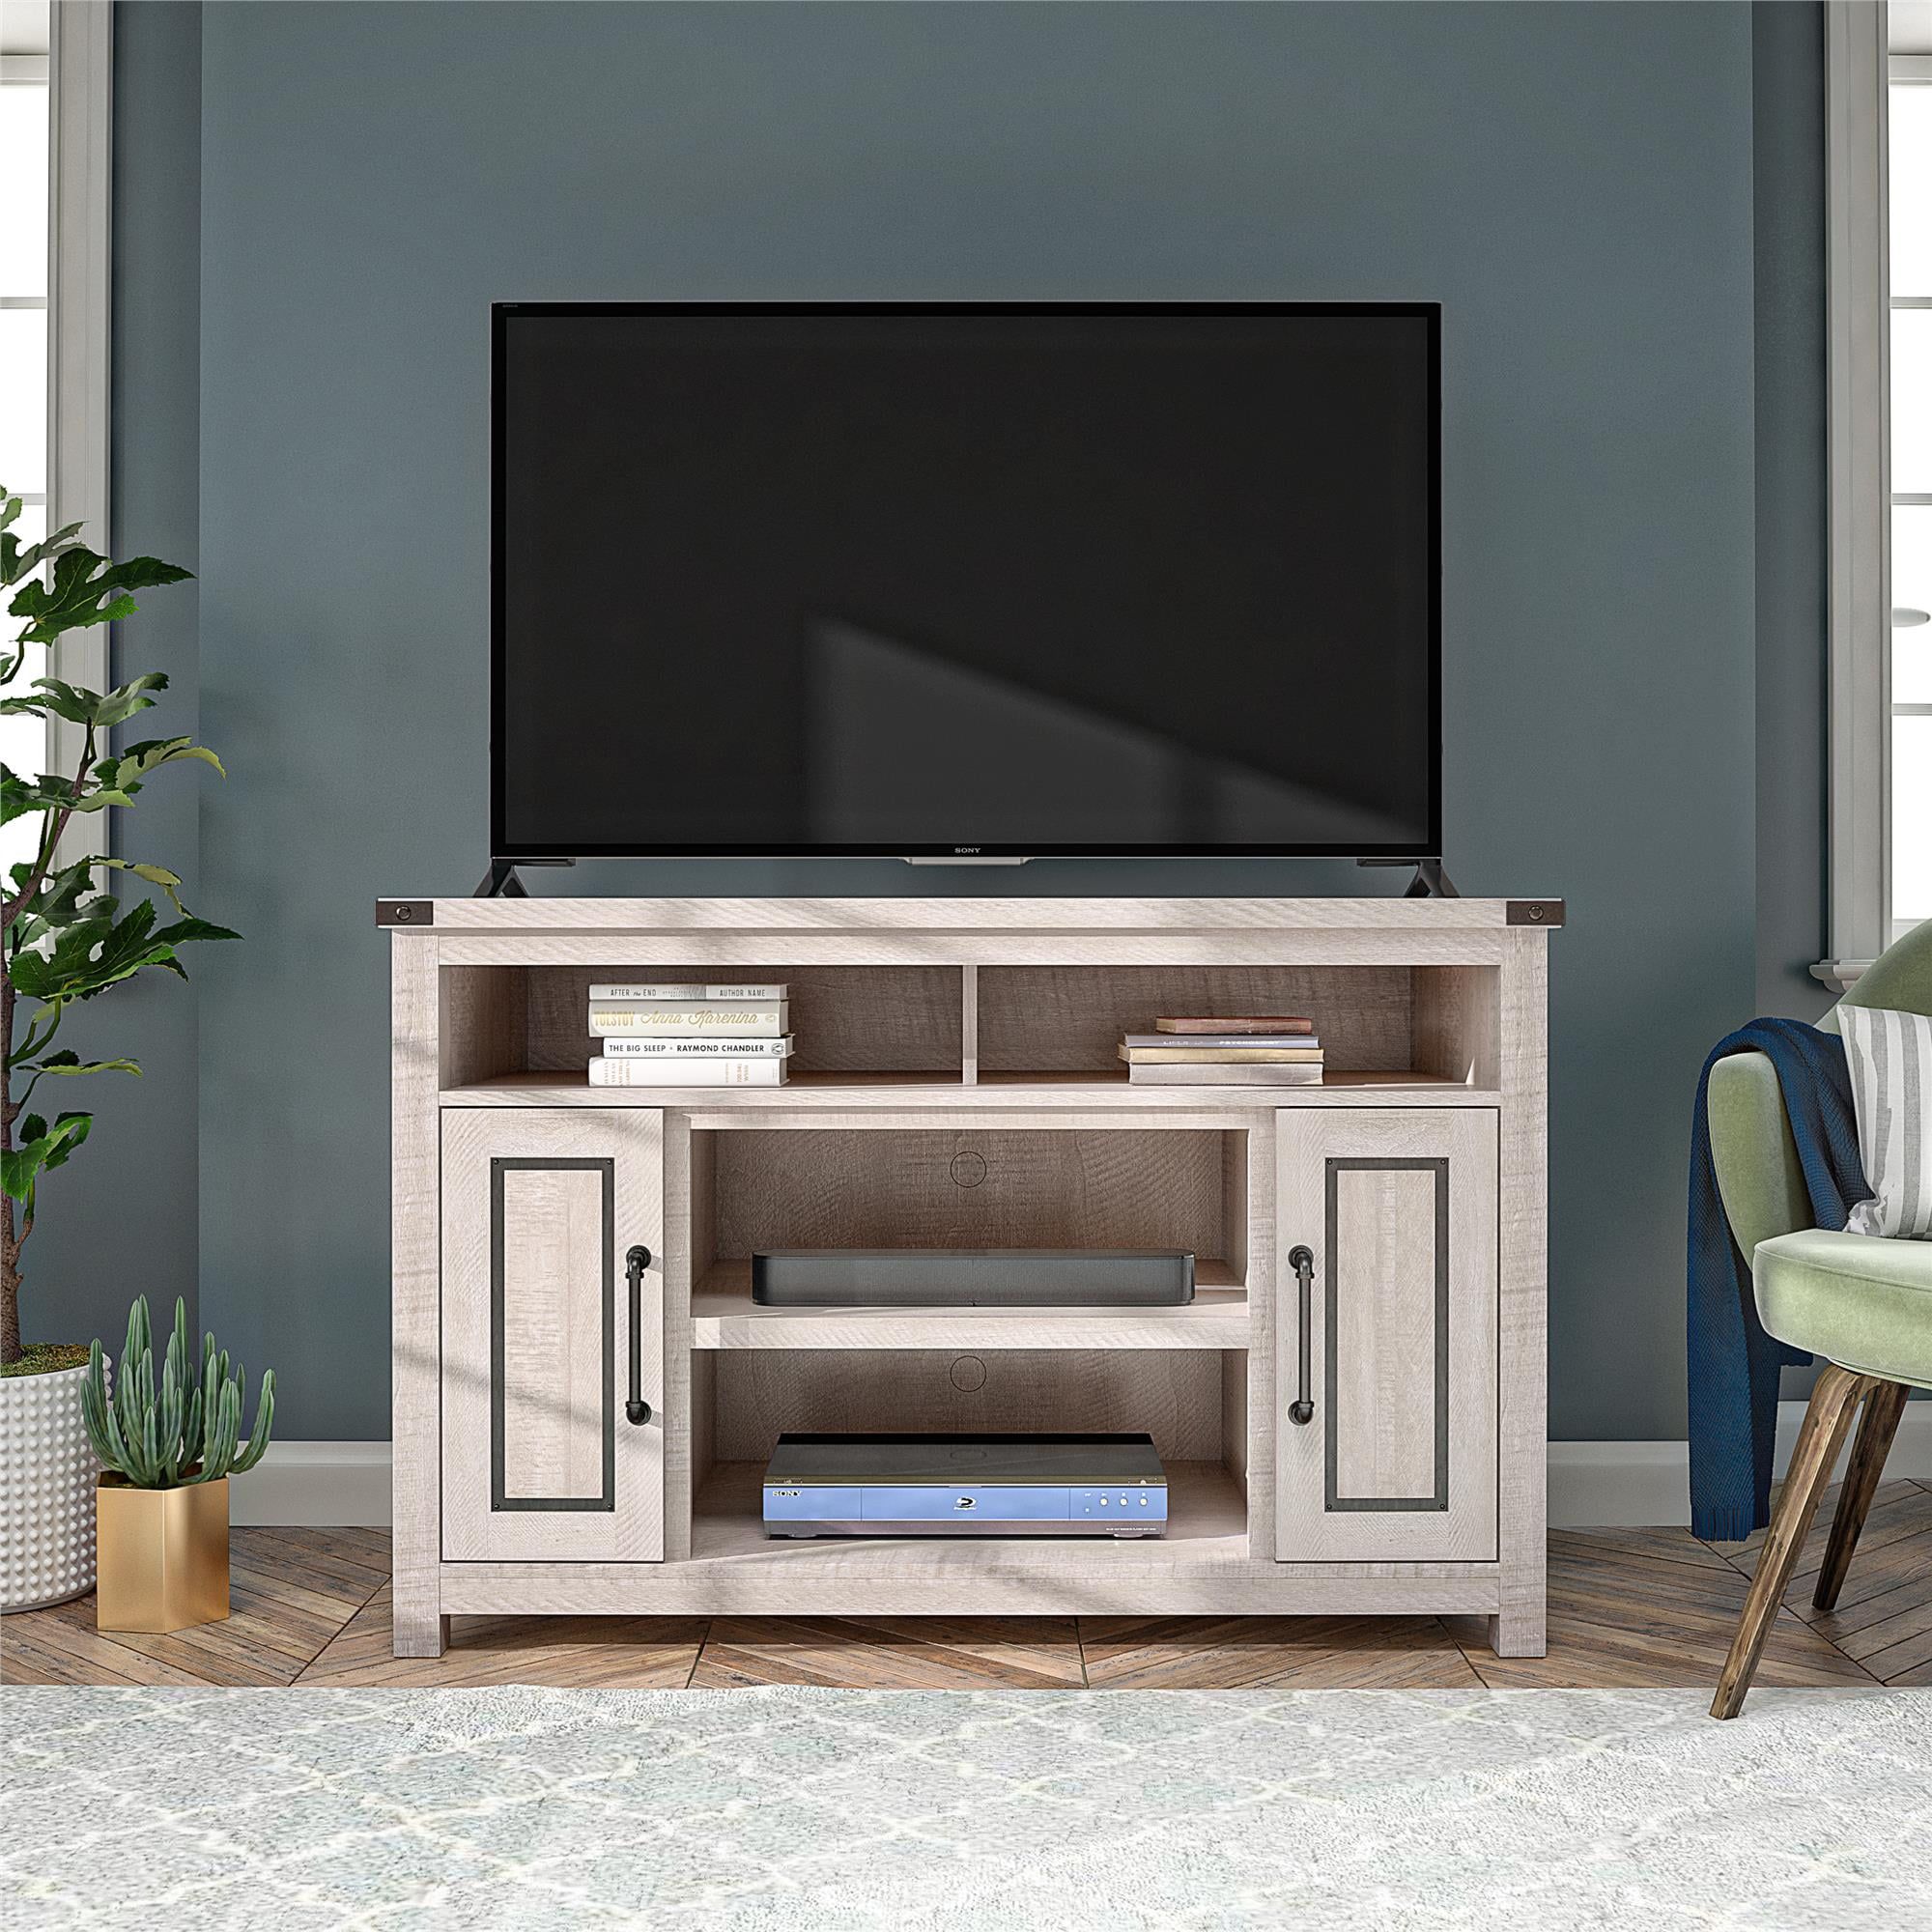 Ameriwood Home Avanta Tv Stand For Tvs Up To 48", Rustic White Within Dual Use Storage Cabinet Tv Stands (View 9 of 20)